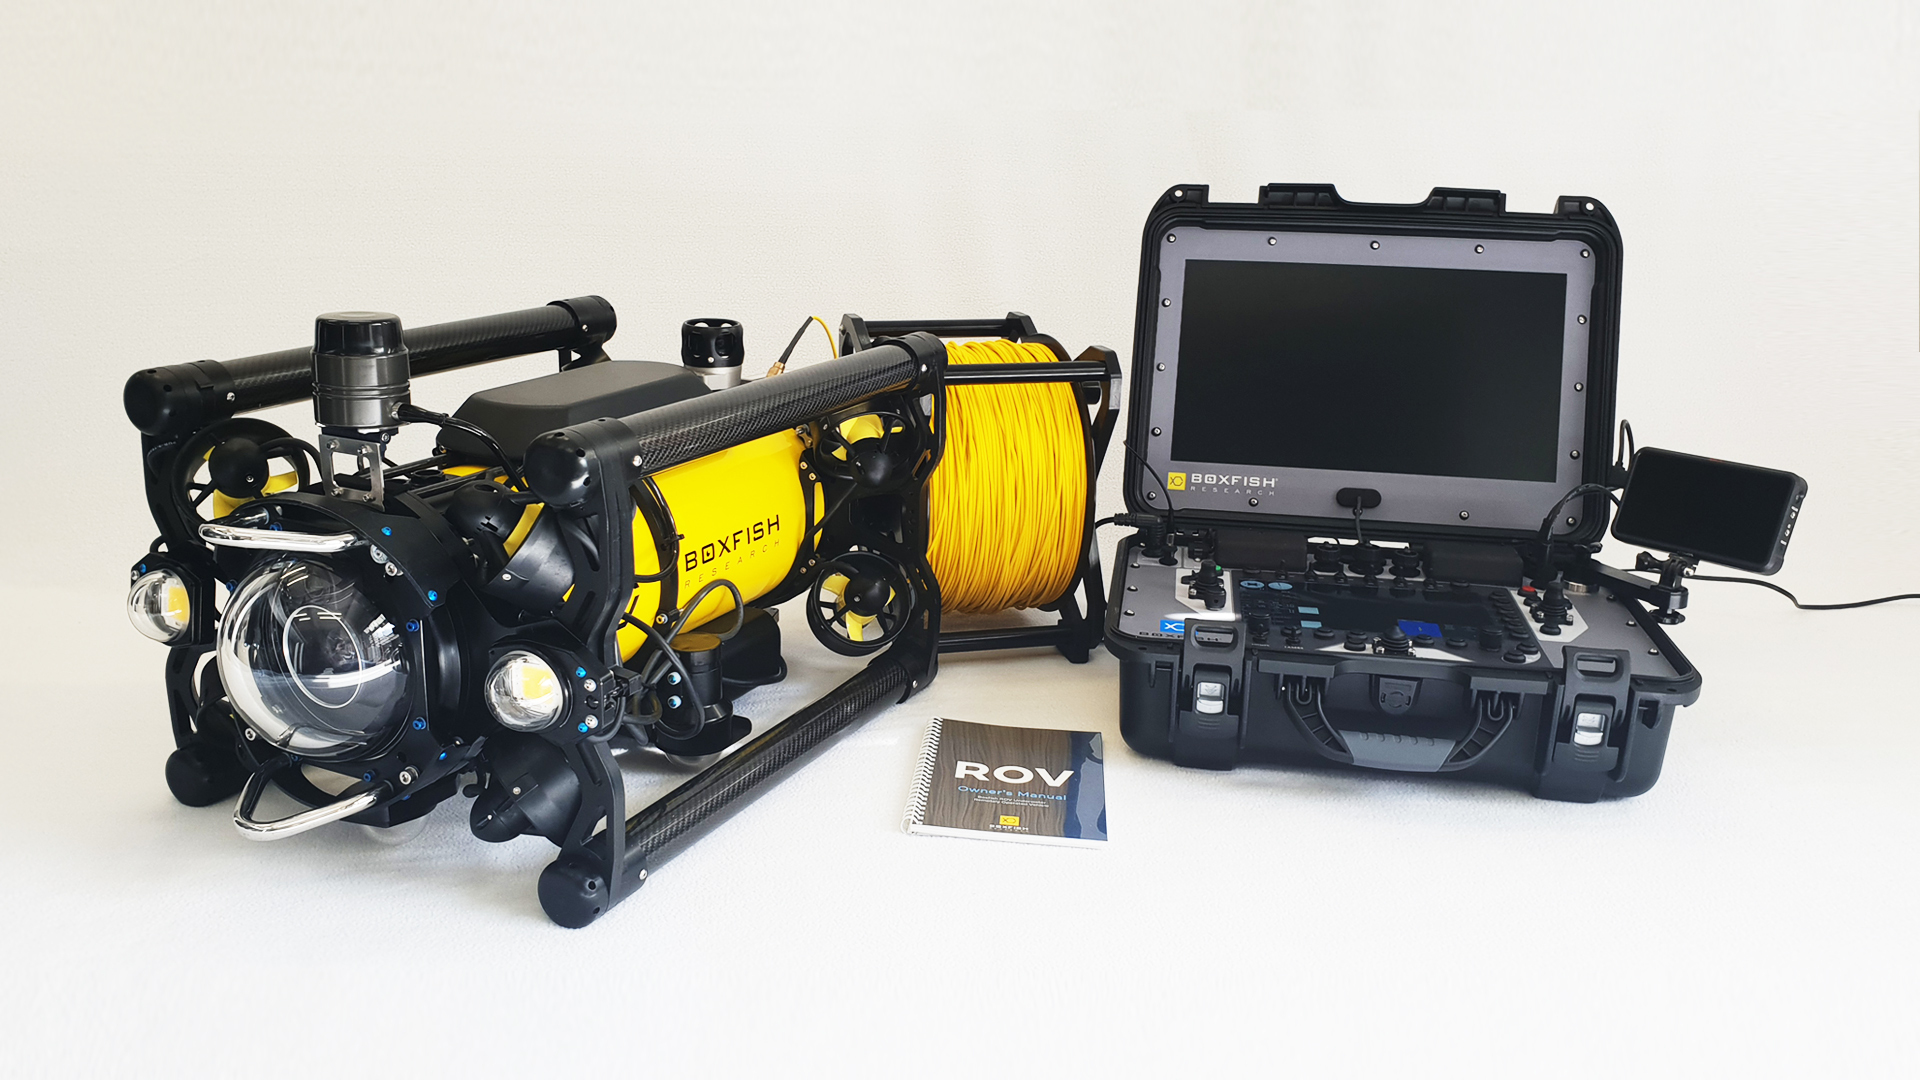 Boxfish ROV observation-class ROV for underwater asset inspections.